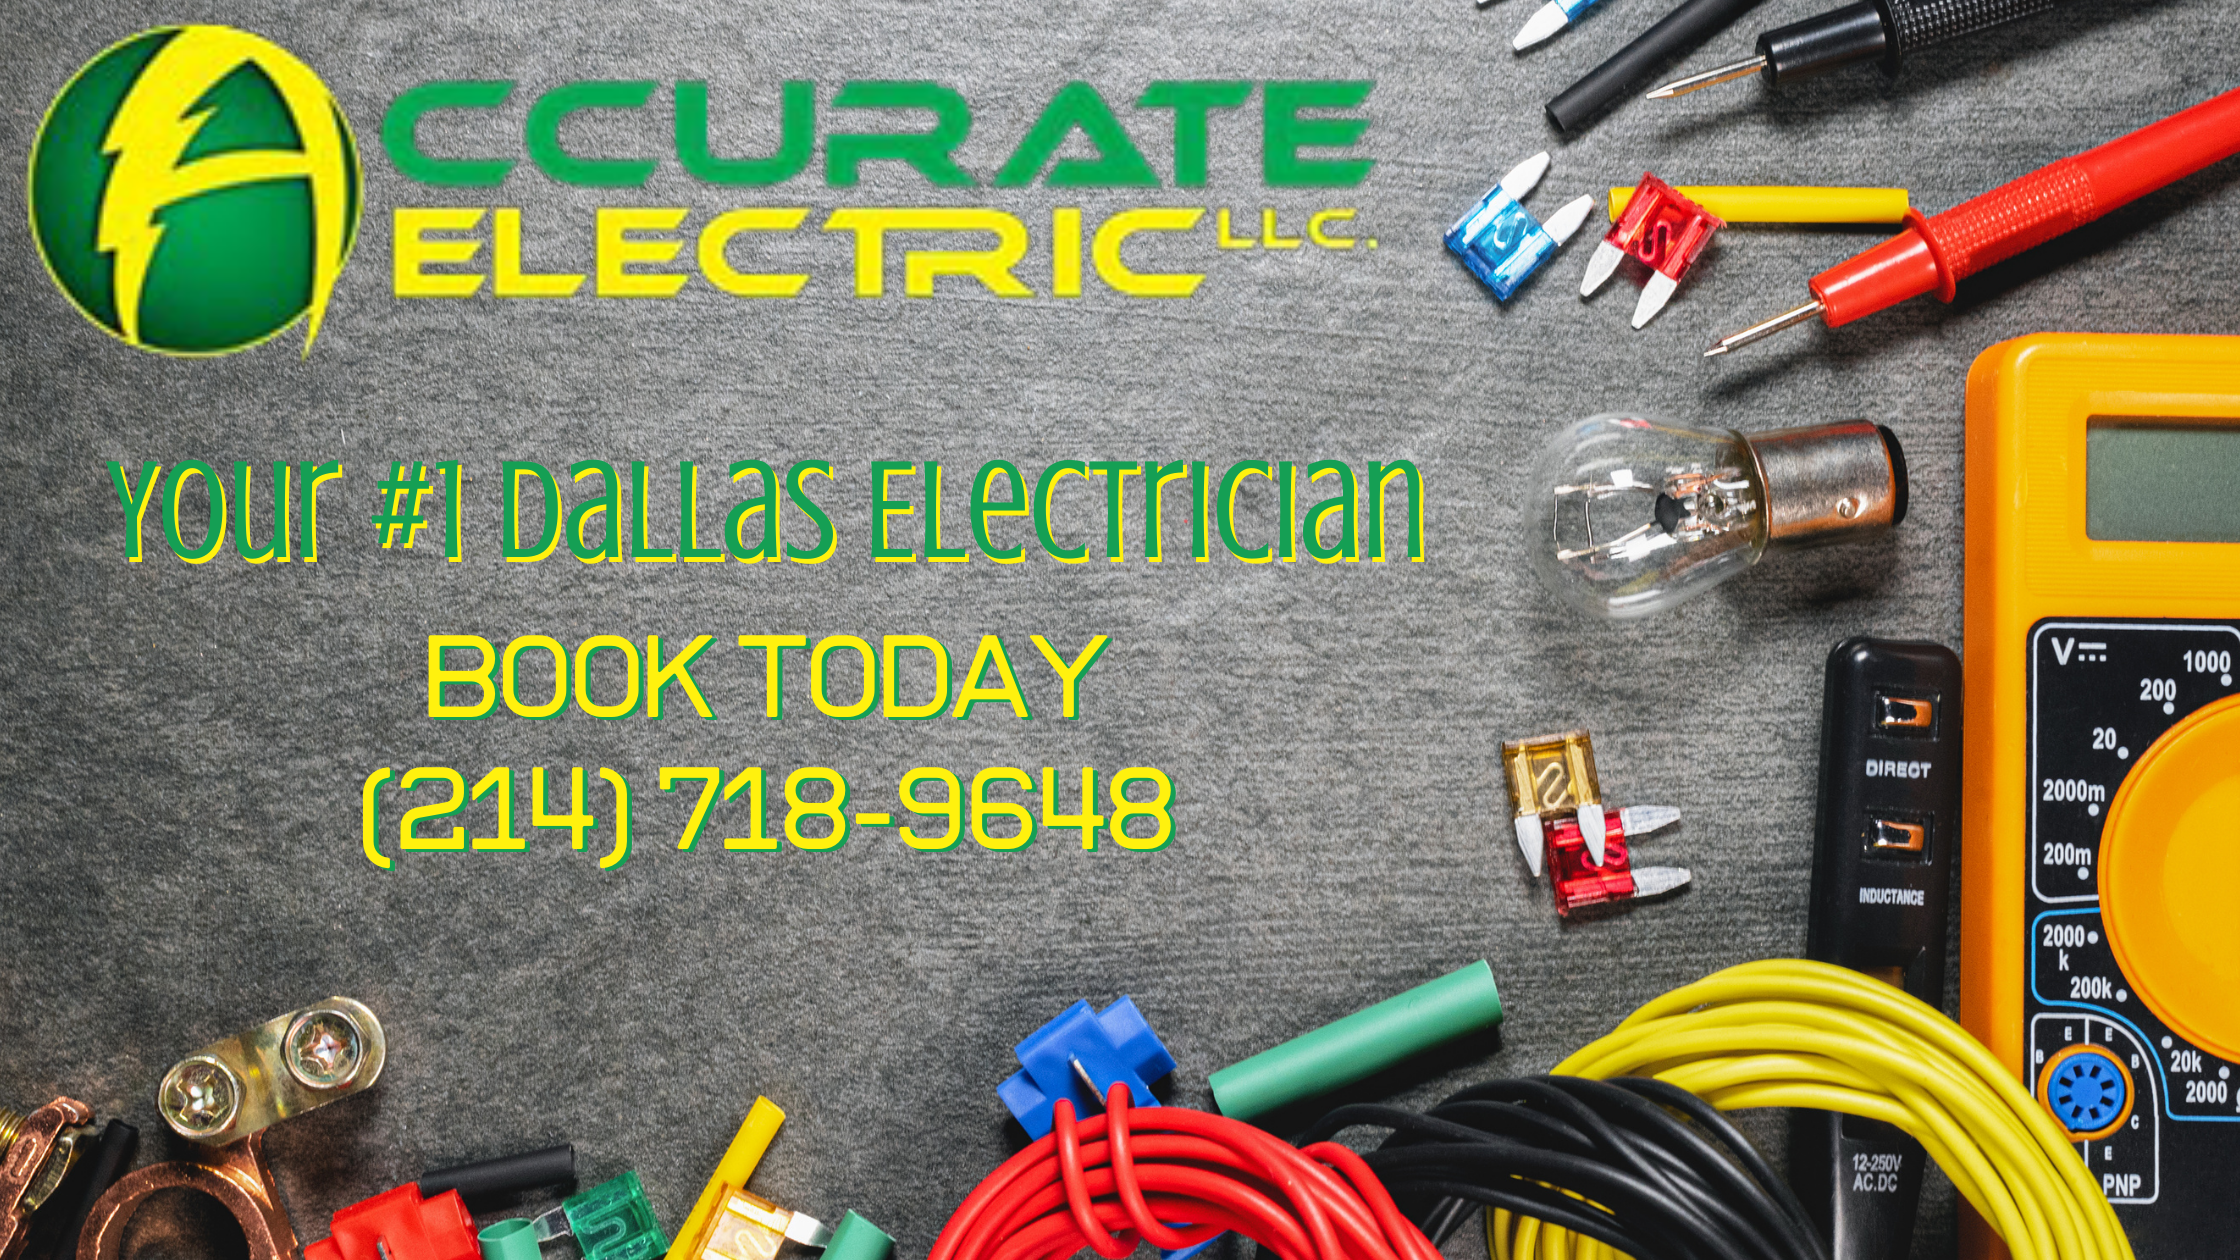 Accurate Electric - Your #1 Dallas Electrician - 214-718-9648